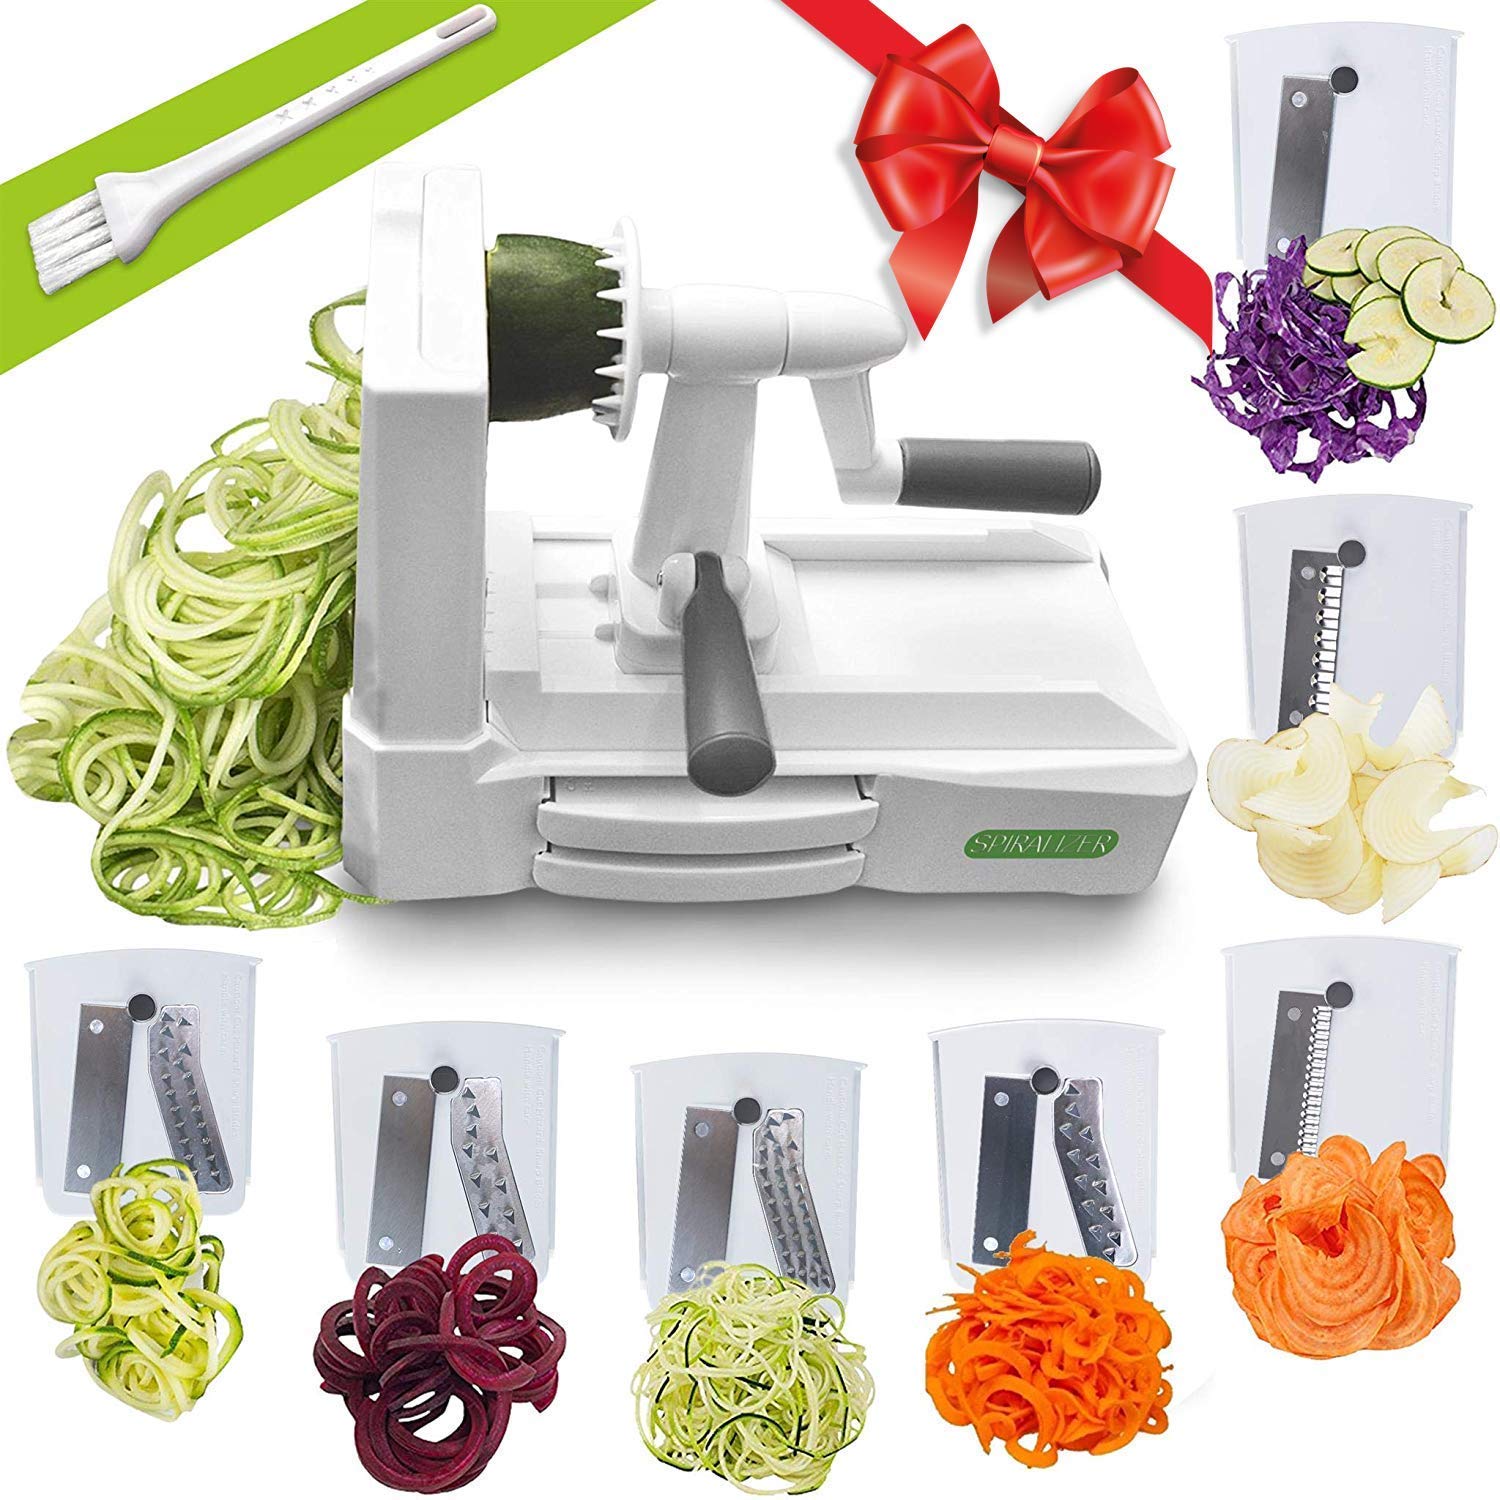 Spiralizer Low Carb Gift Idea